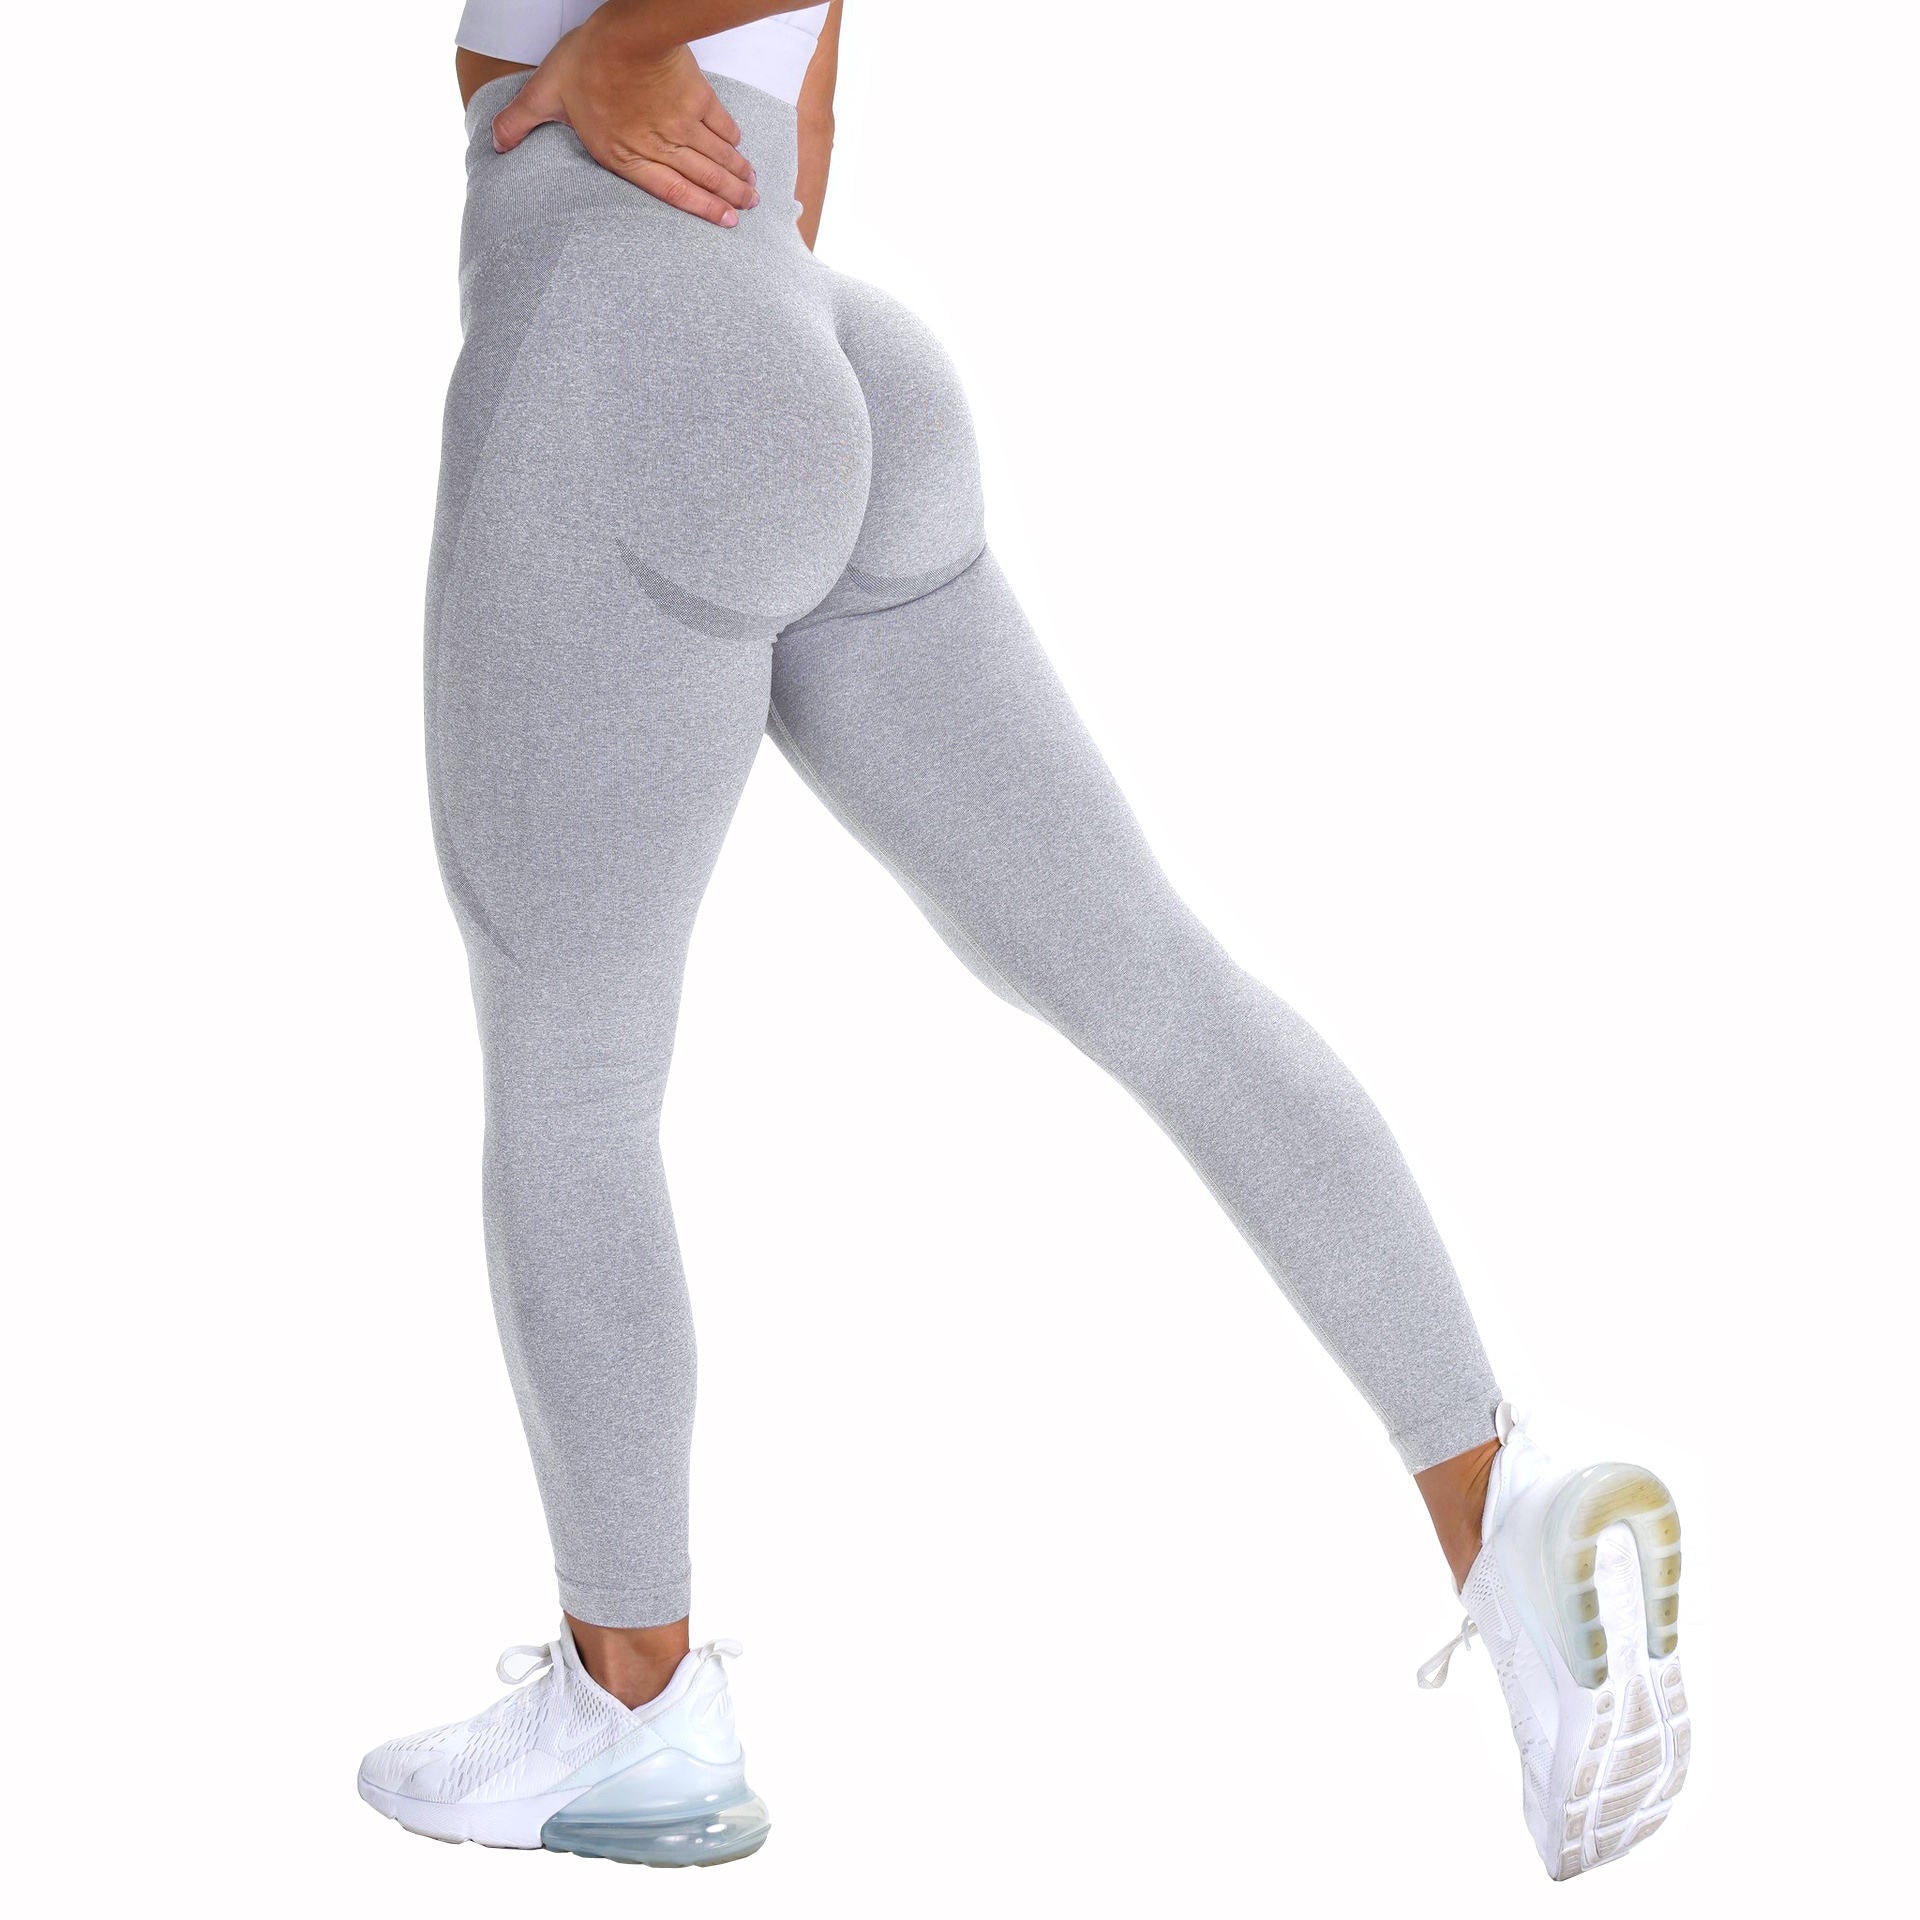 Just $39.95 Classic Women's High Waisted Yoga Pants.